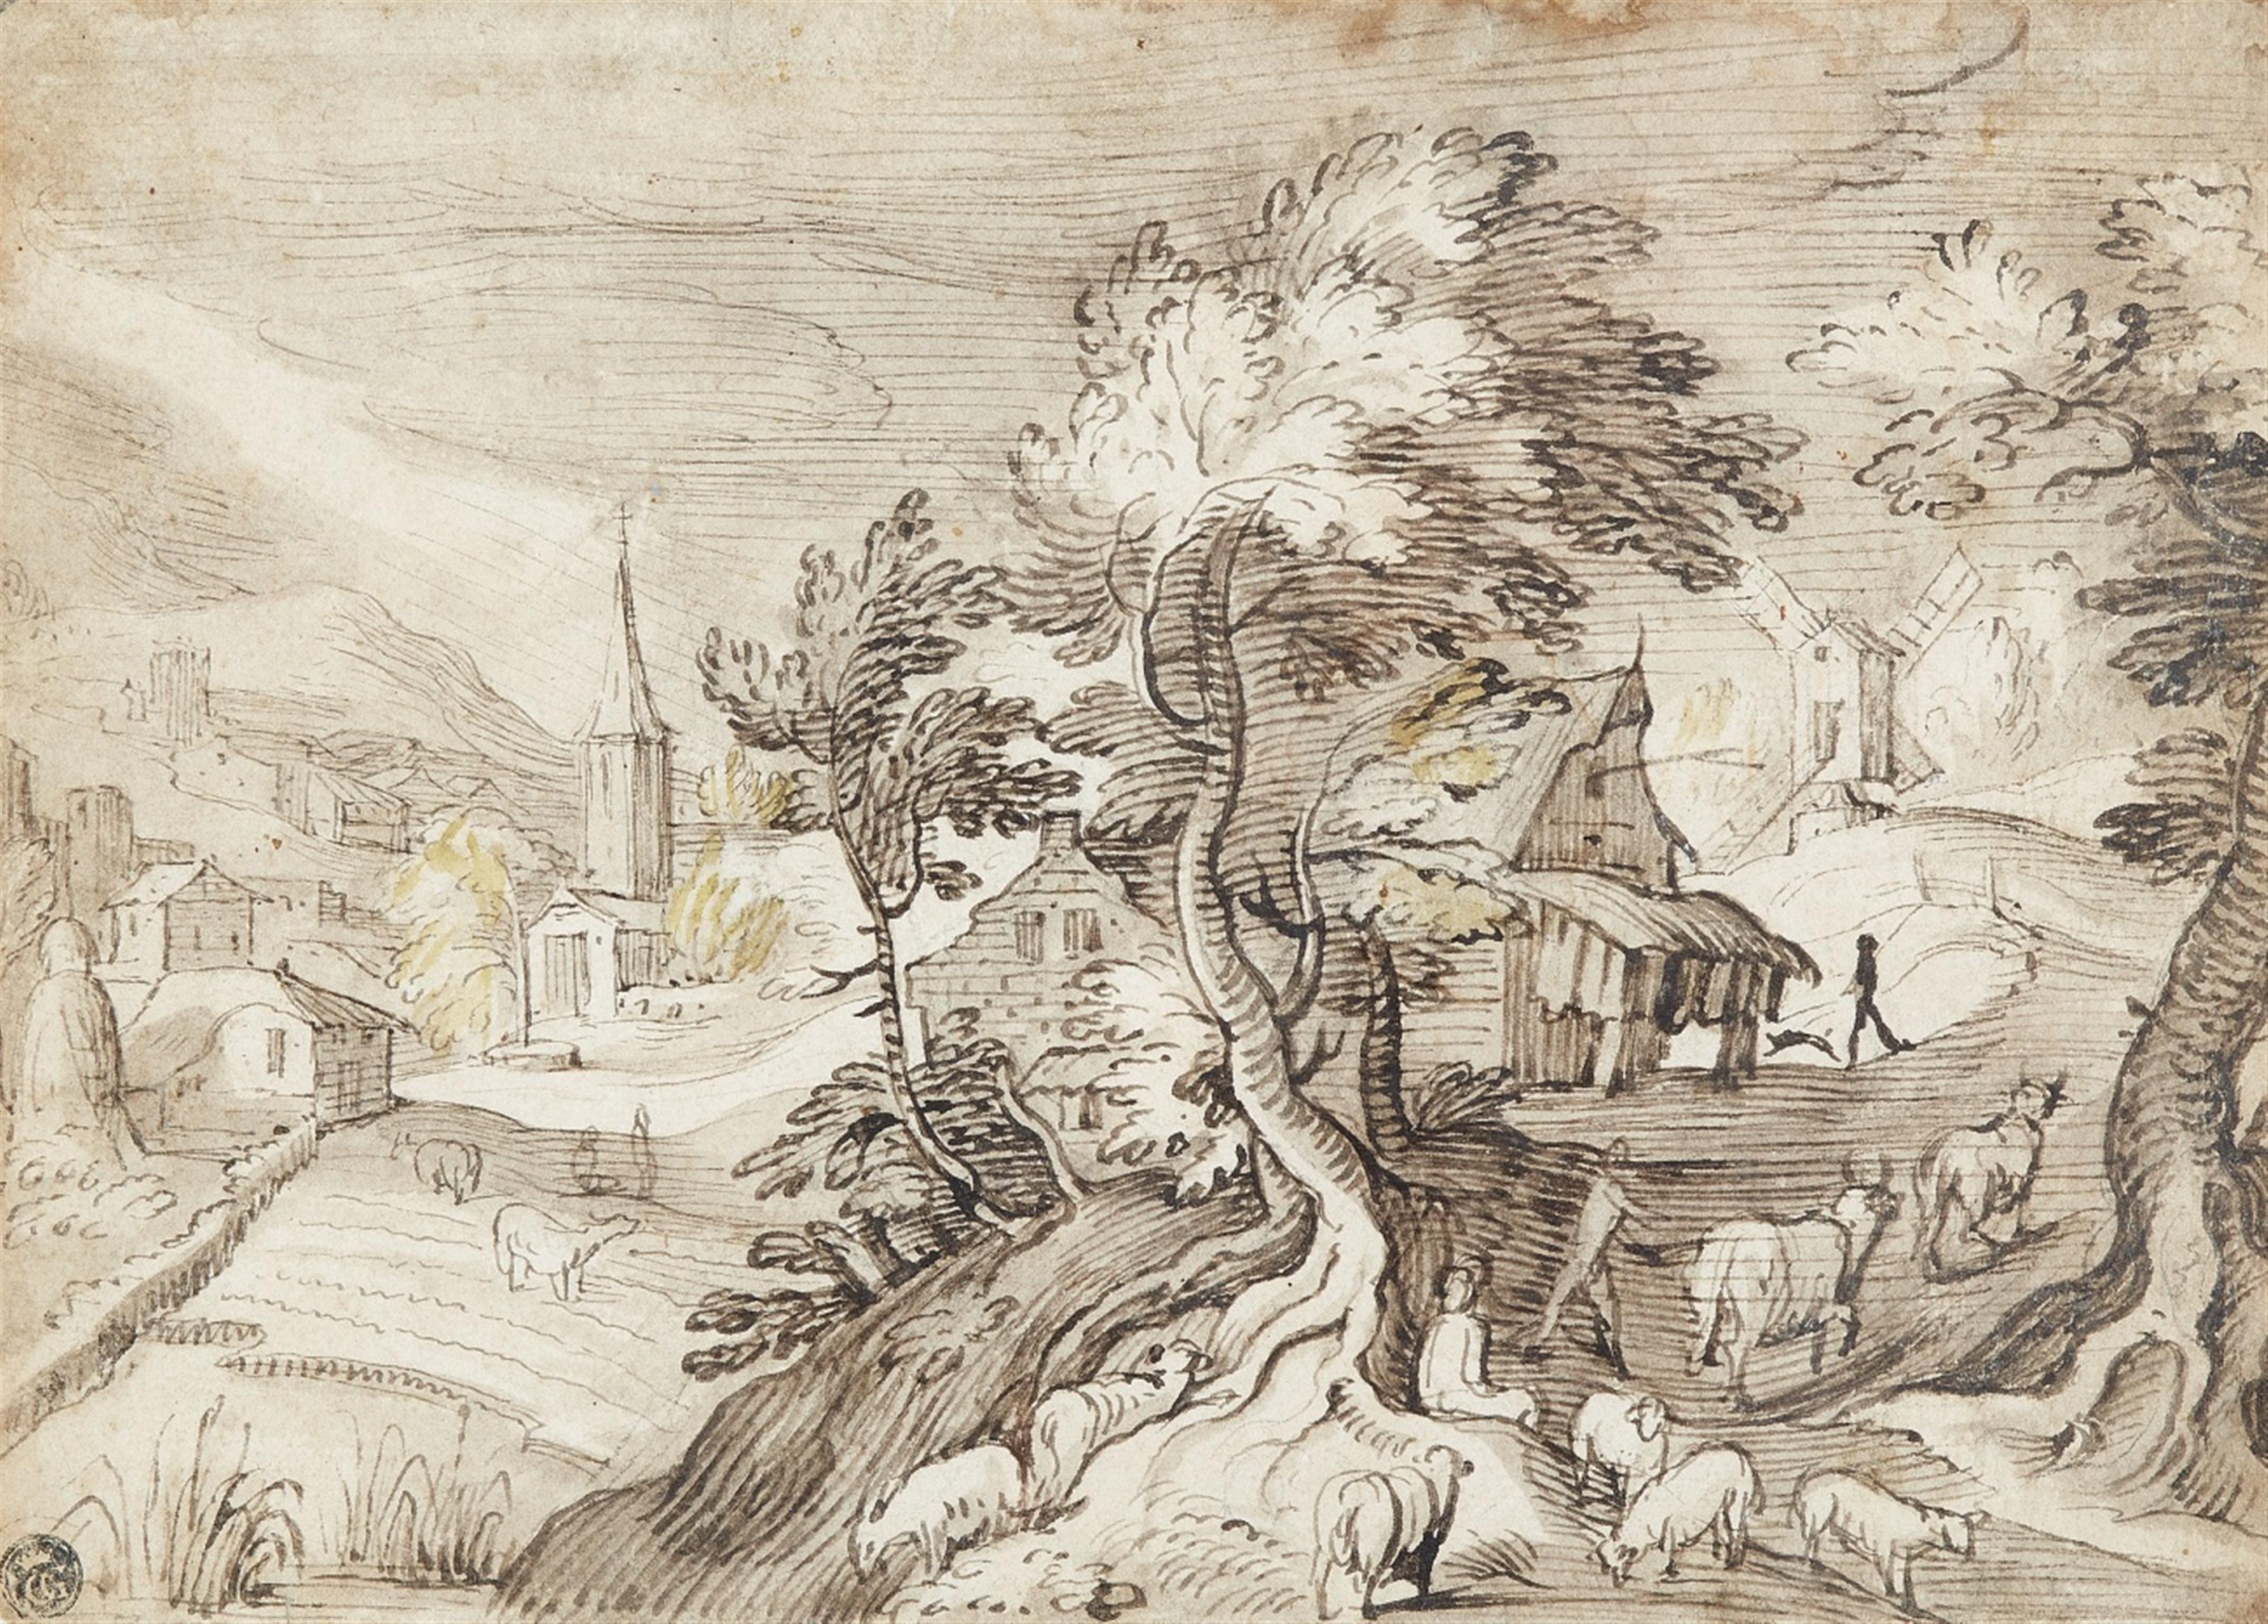 Jacob Grimmer, attributed to - Shepherds in a Hilly Landscape - image-1